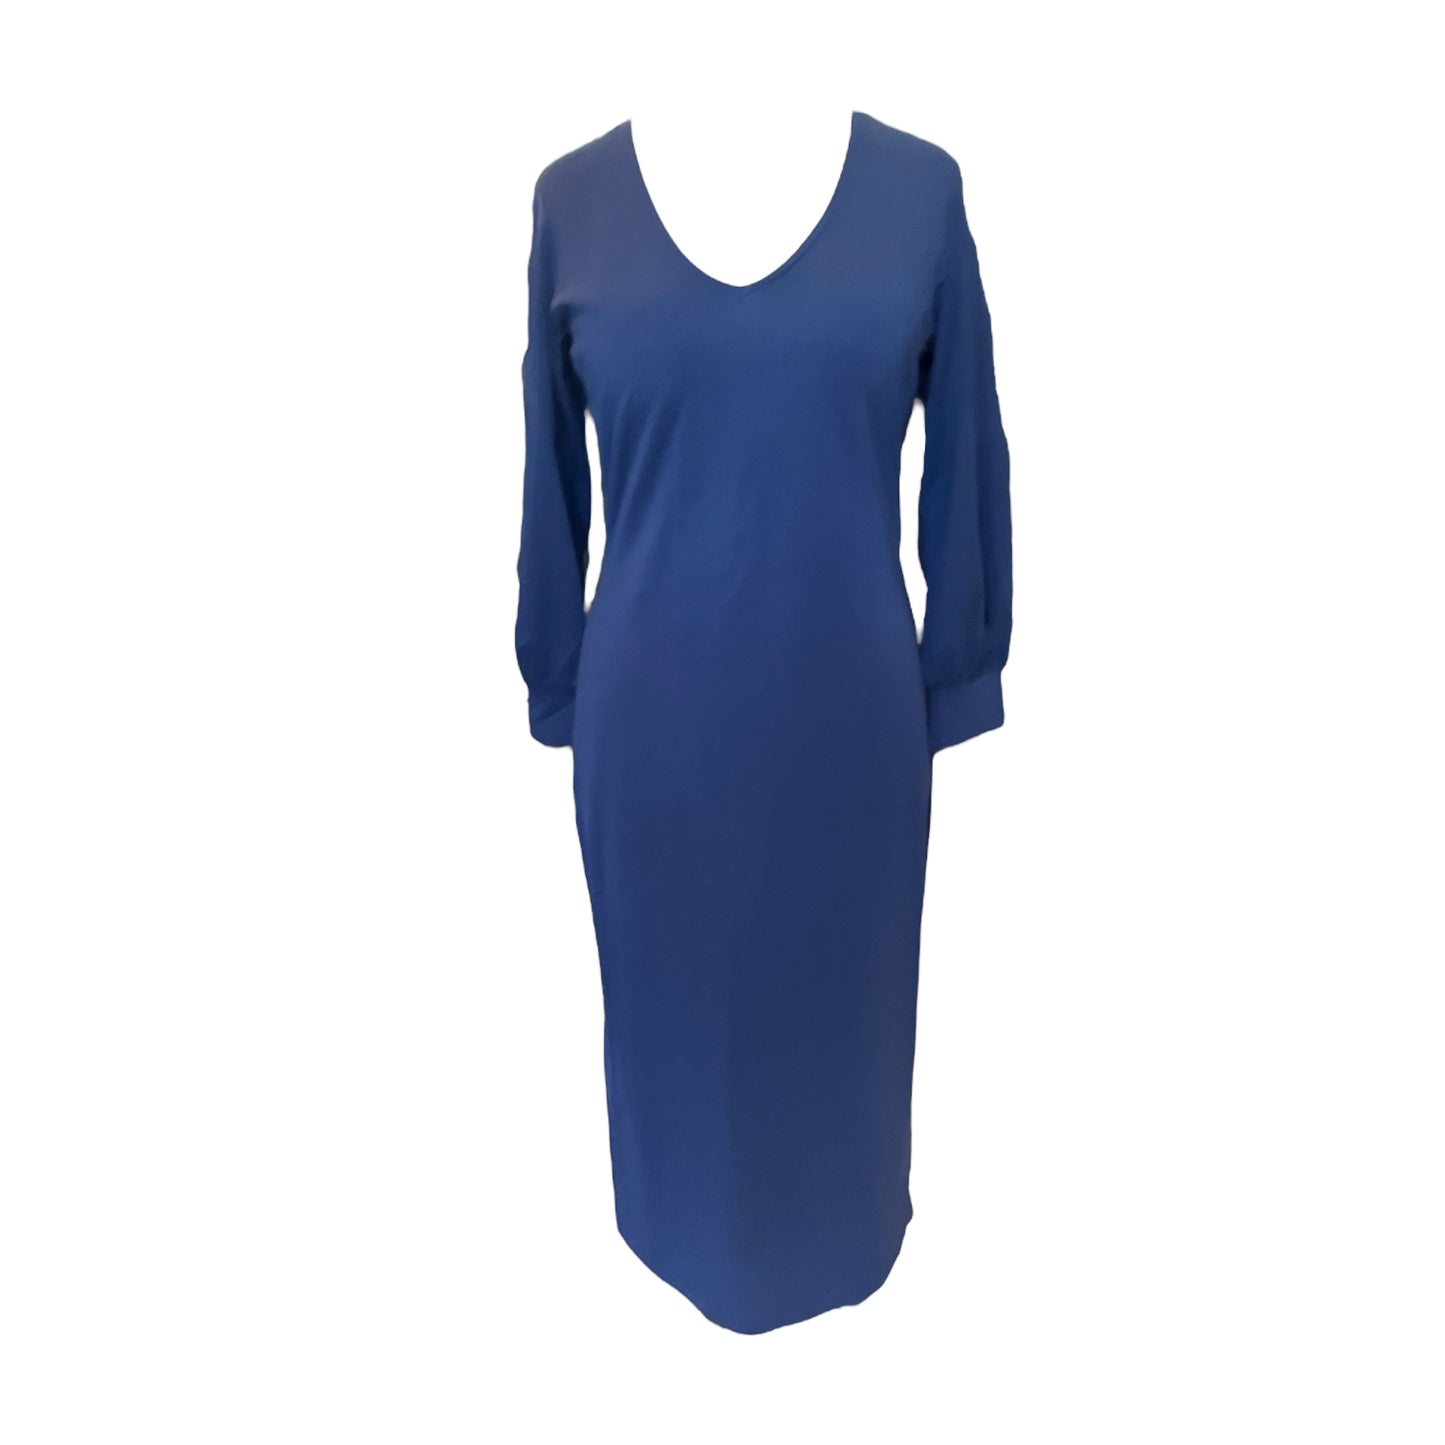 BRAND NEW WITH TAGS Jaeger Navy Dress